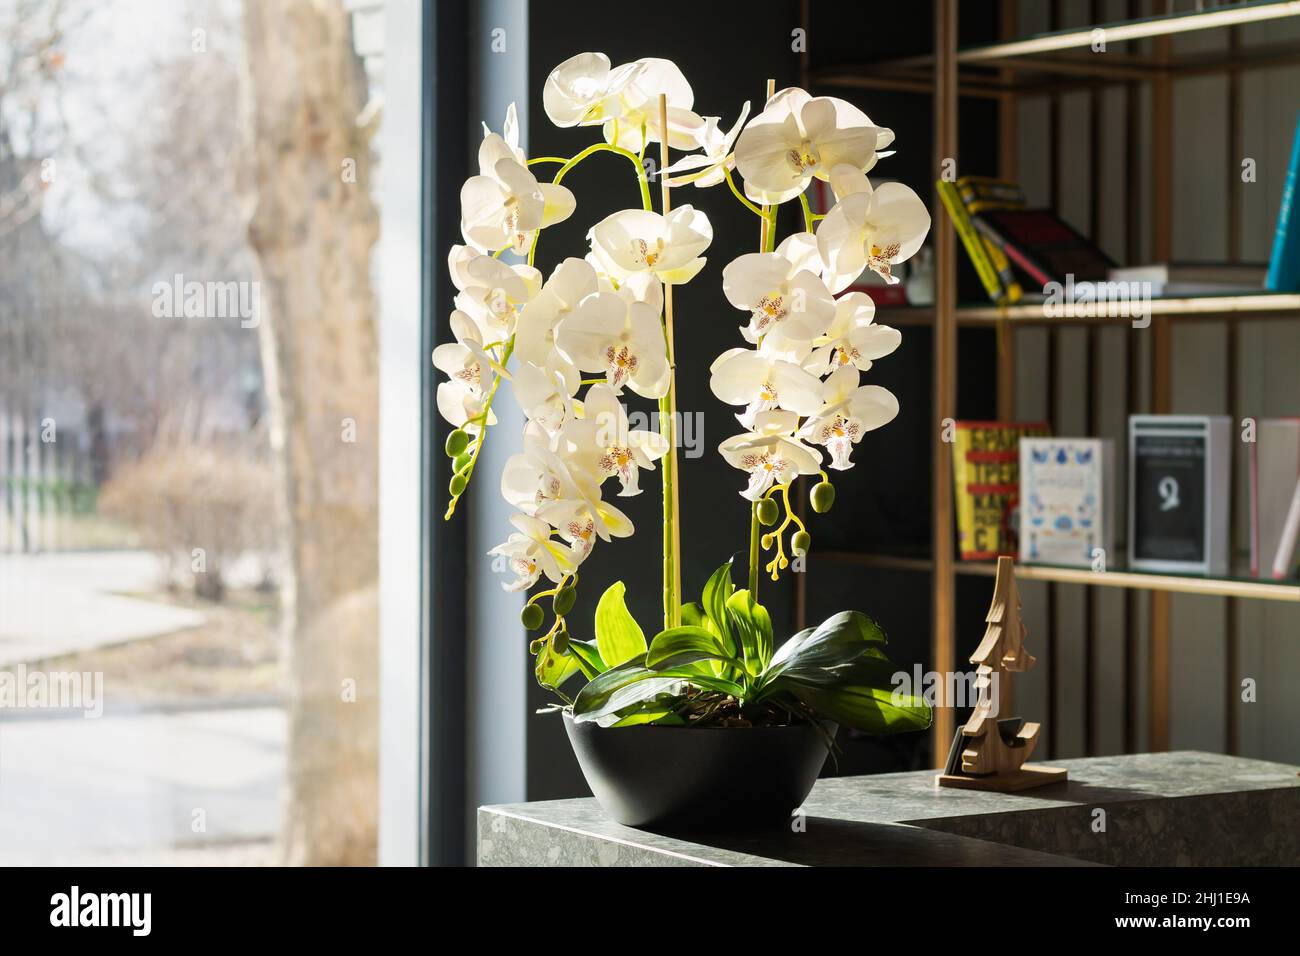 Stylish interior design with beautiful white potted orchid flowers and bookcase next to window Stock Photo